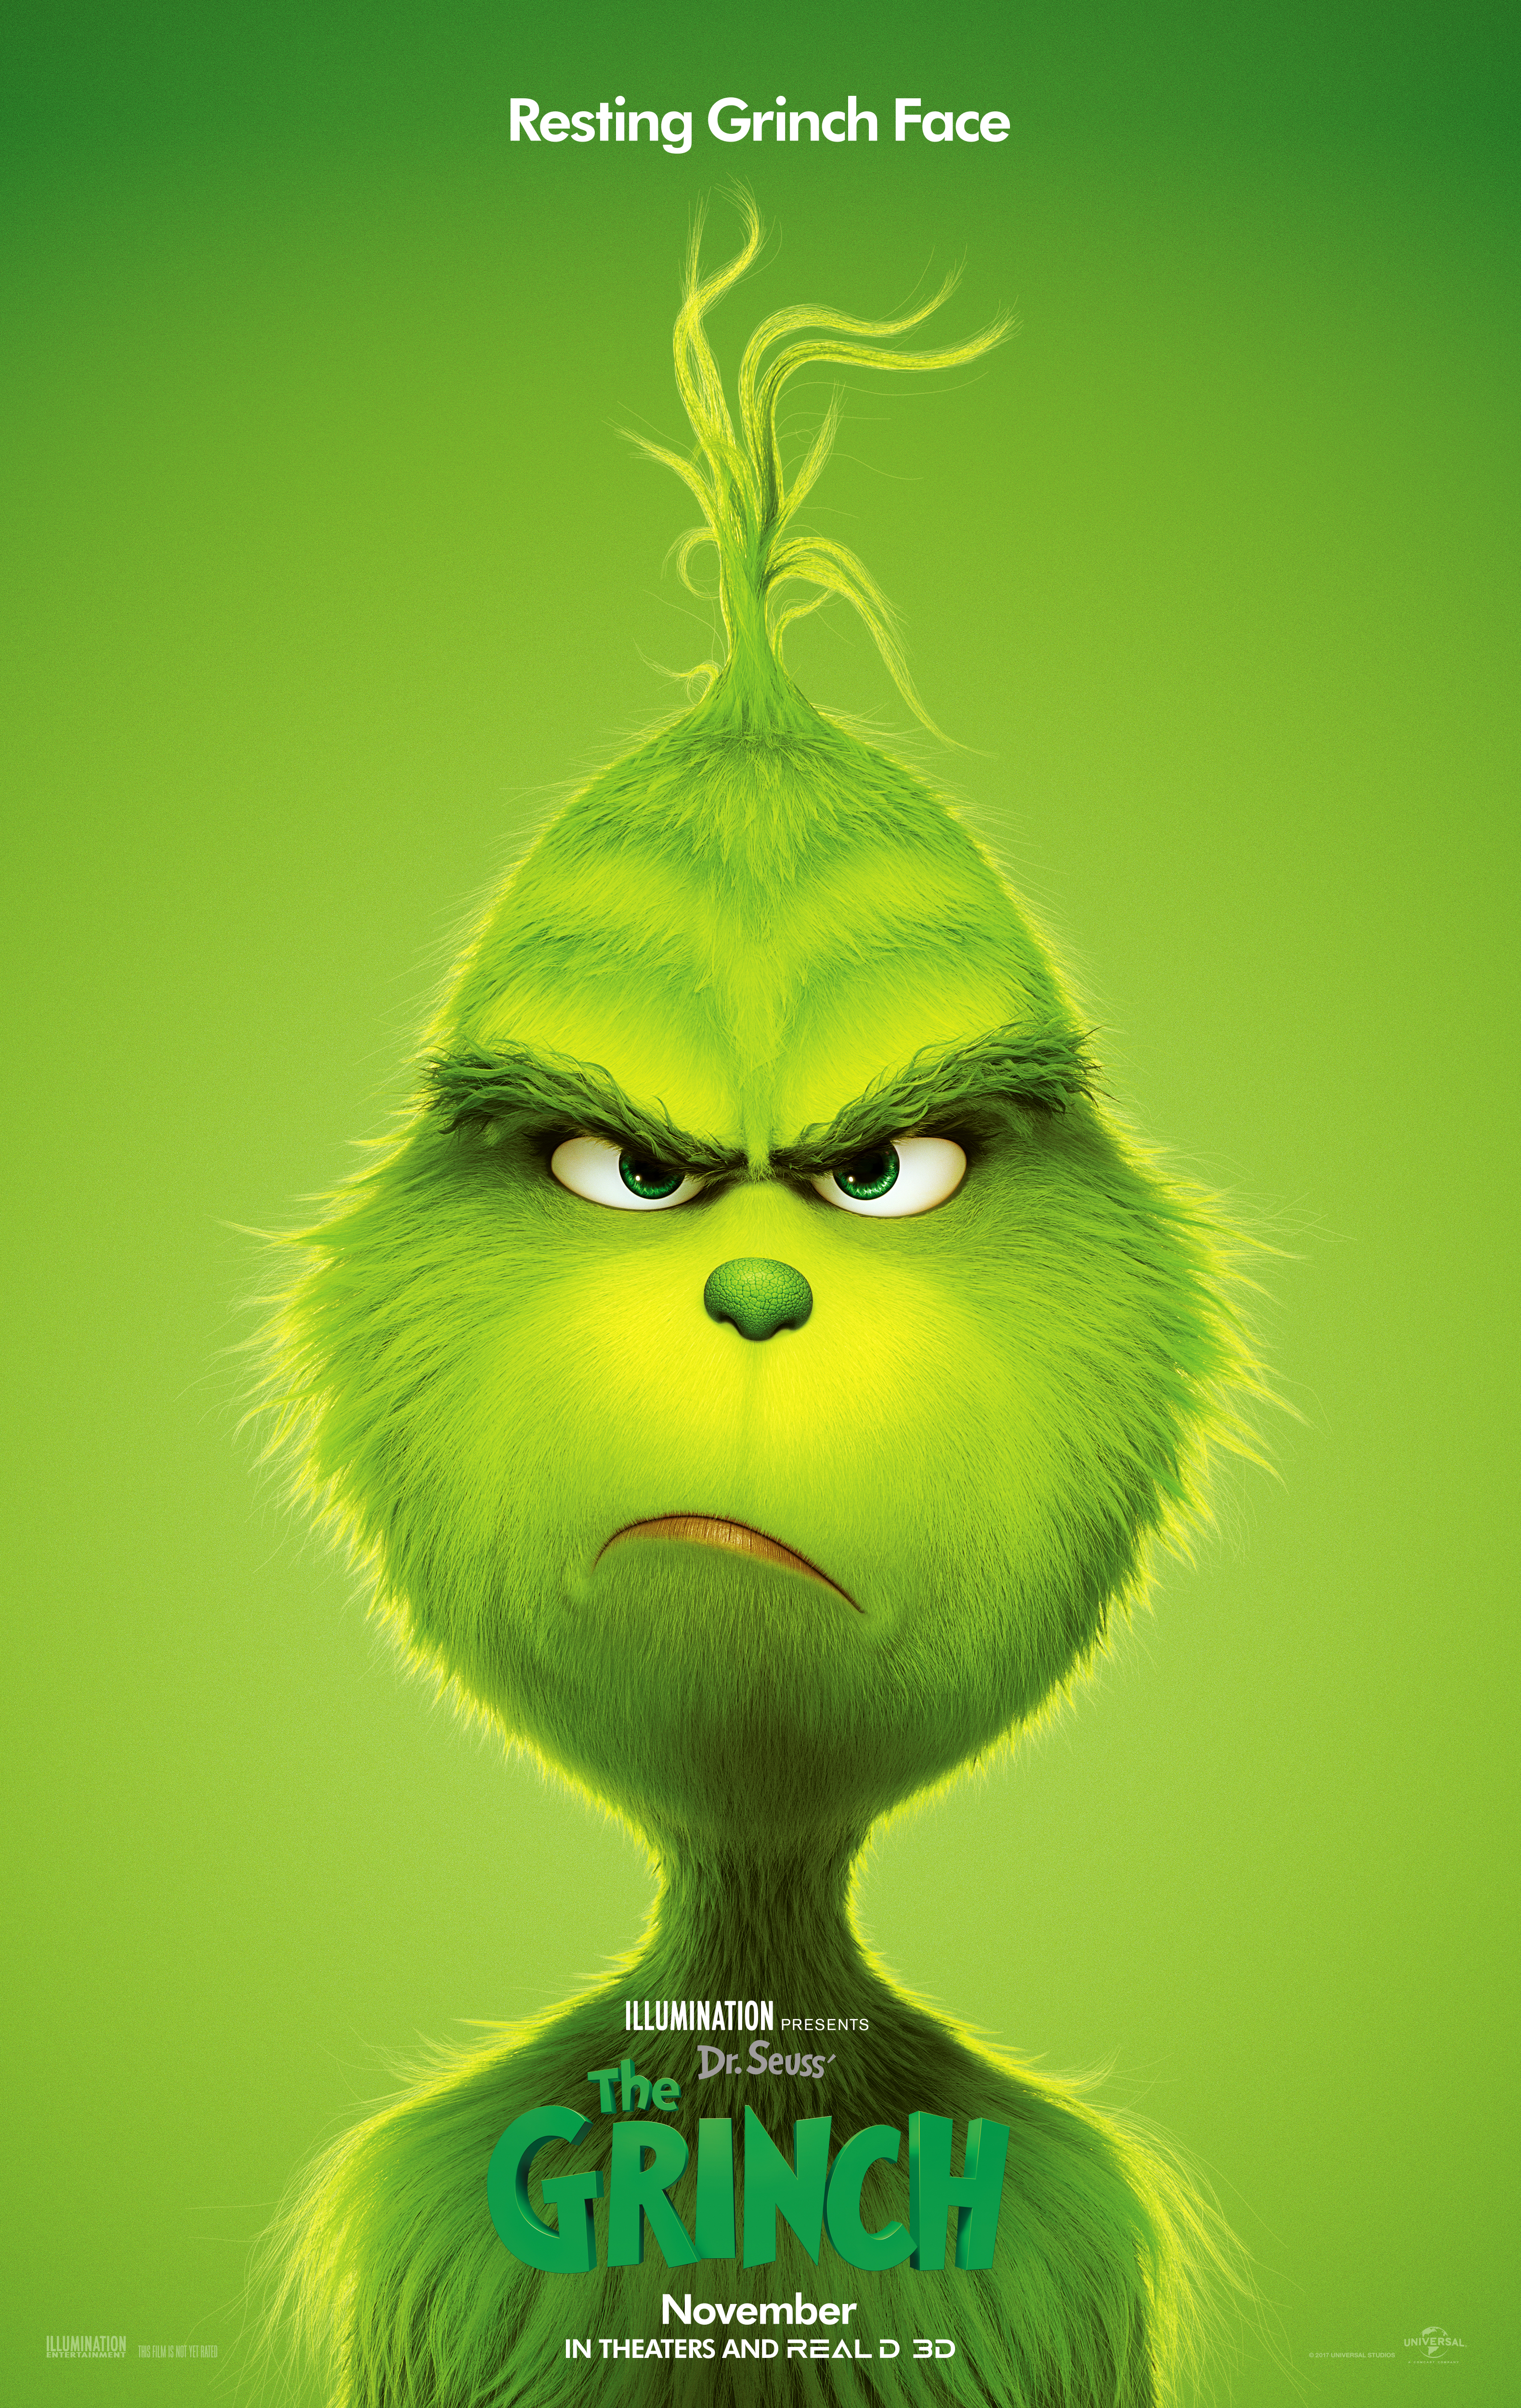 Dr. Seuss' The Grinch poster (Universal Pictures/Illumination Entertainment)